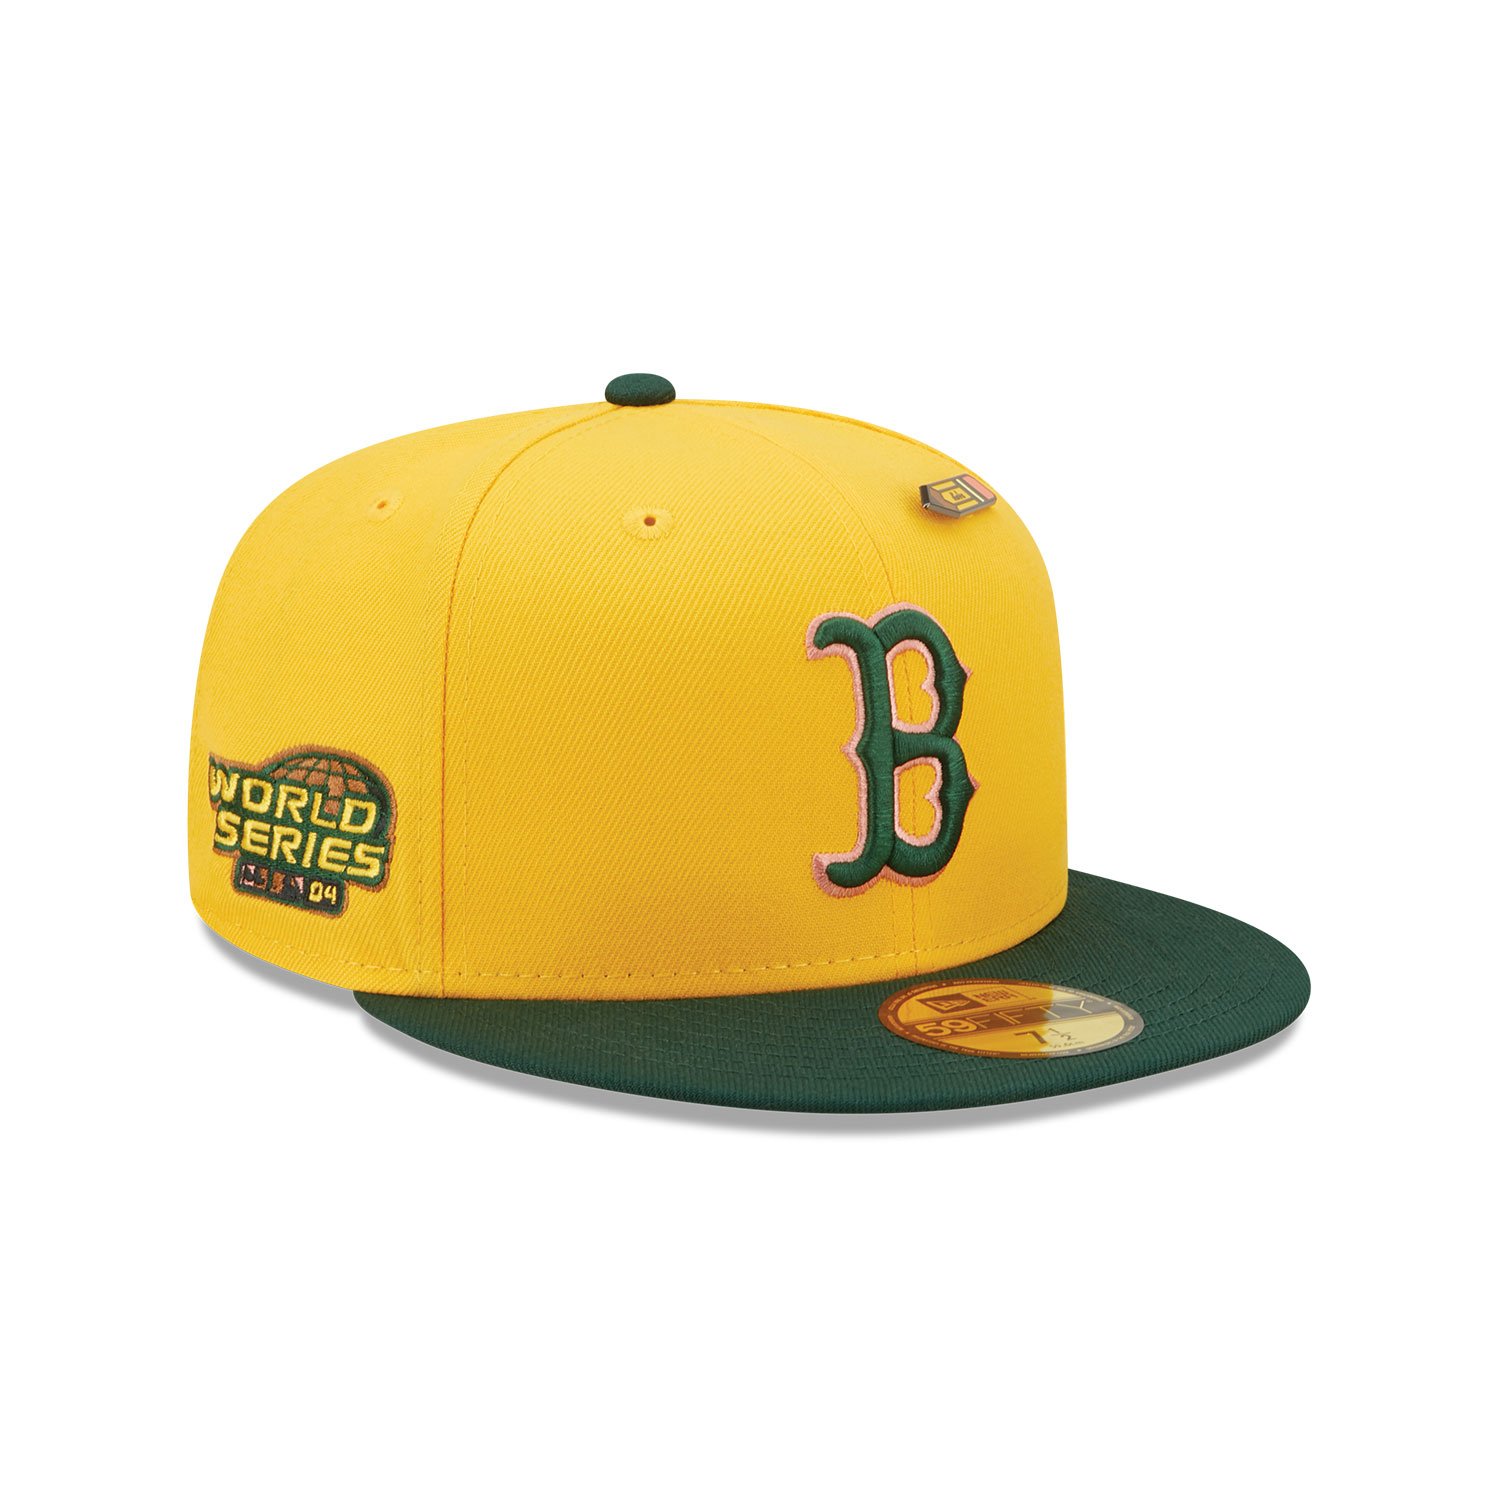 boston red sox in yellow